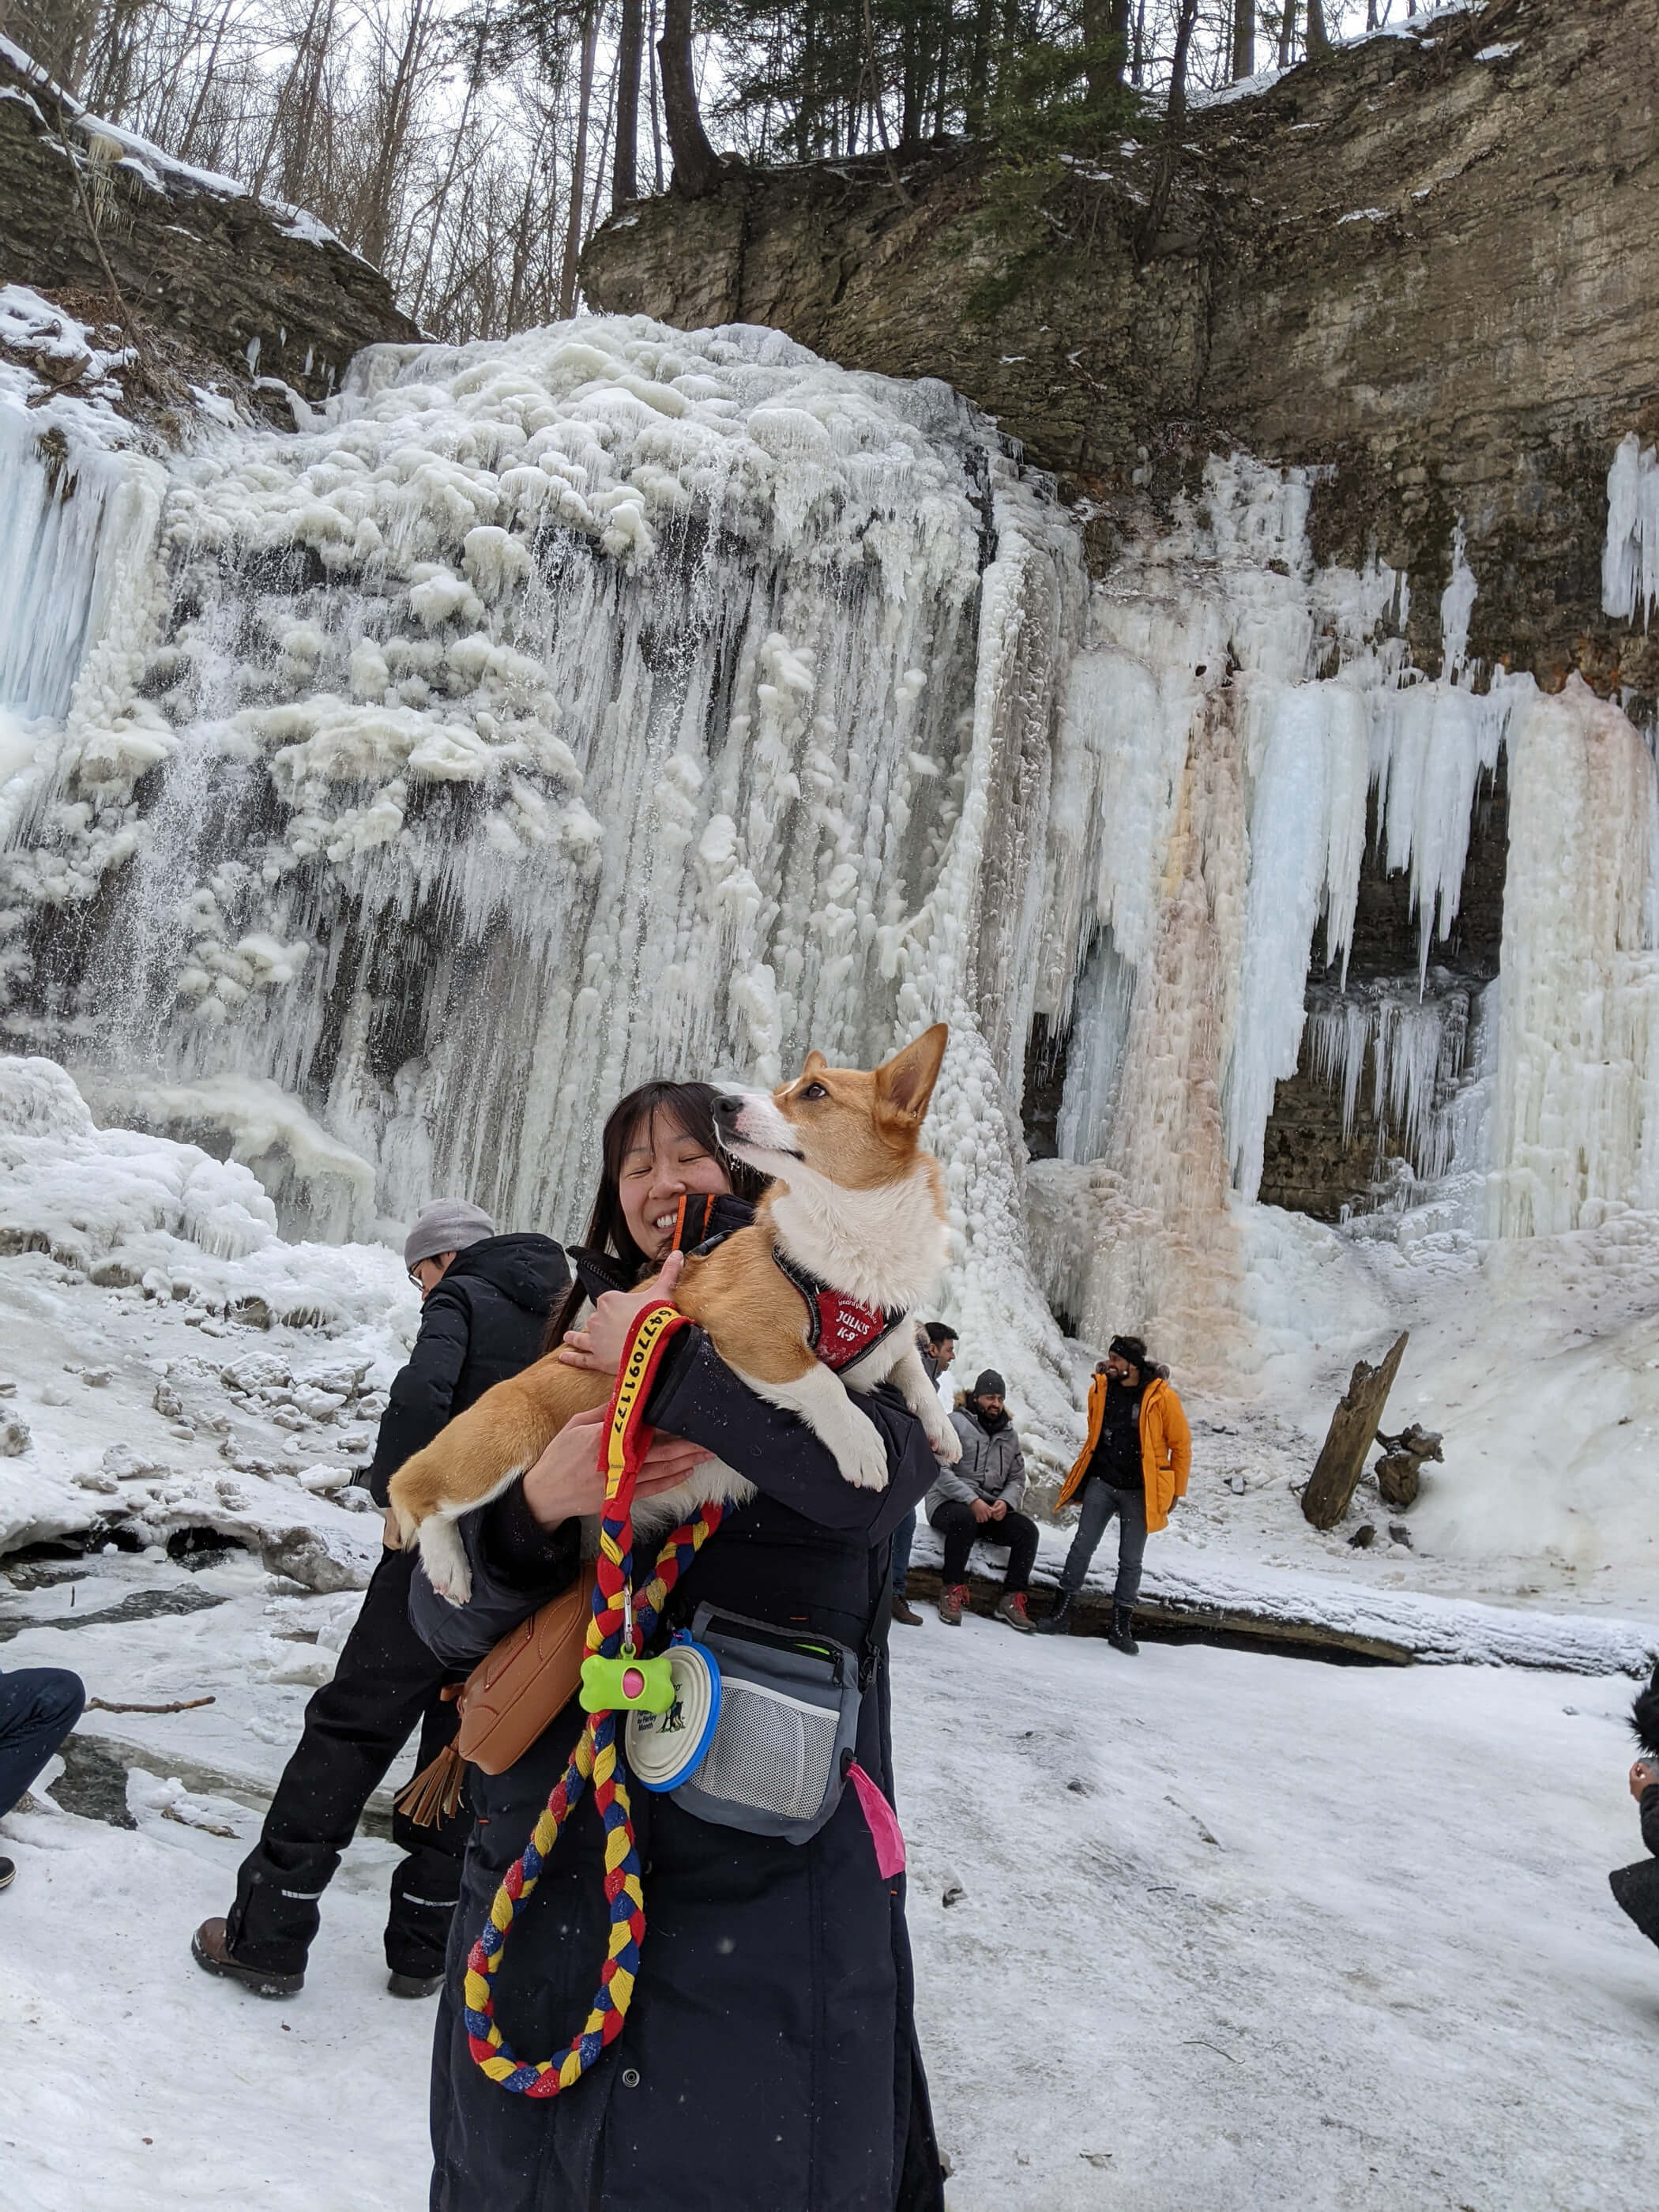 Limone, a red and white corgi wearing a Julius K-9 Harness is in Maria's arm posing by Tiffany Falls, a frozen waterfall in Hamilton. Limone is looking to the right